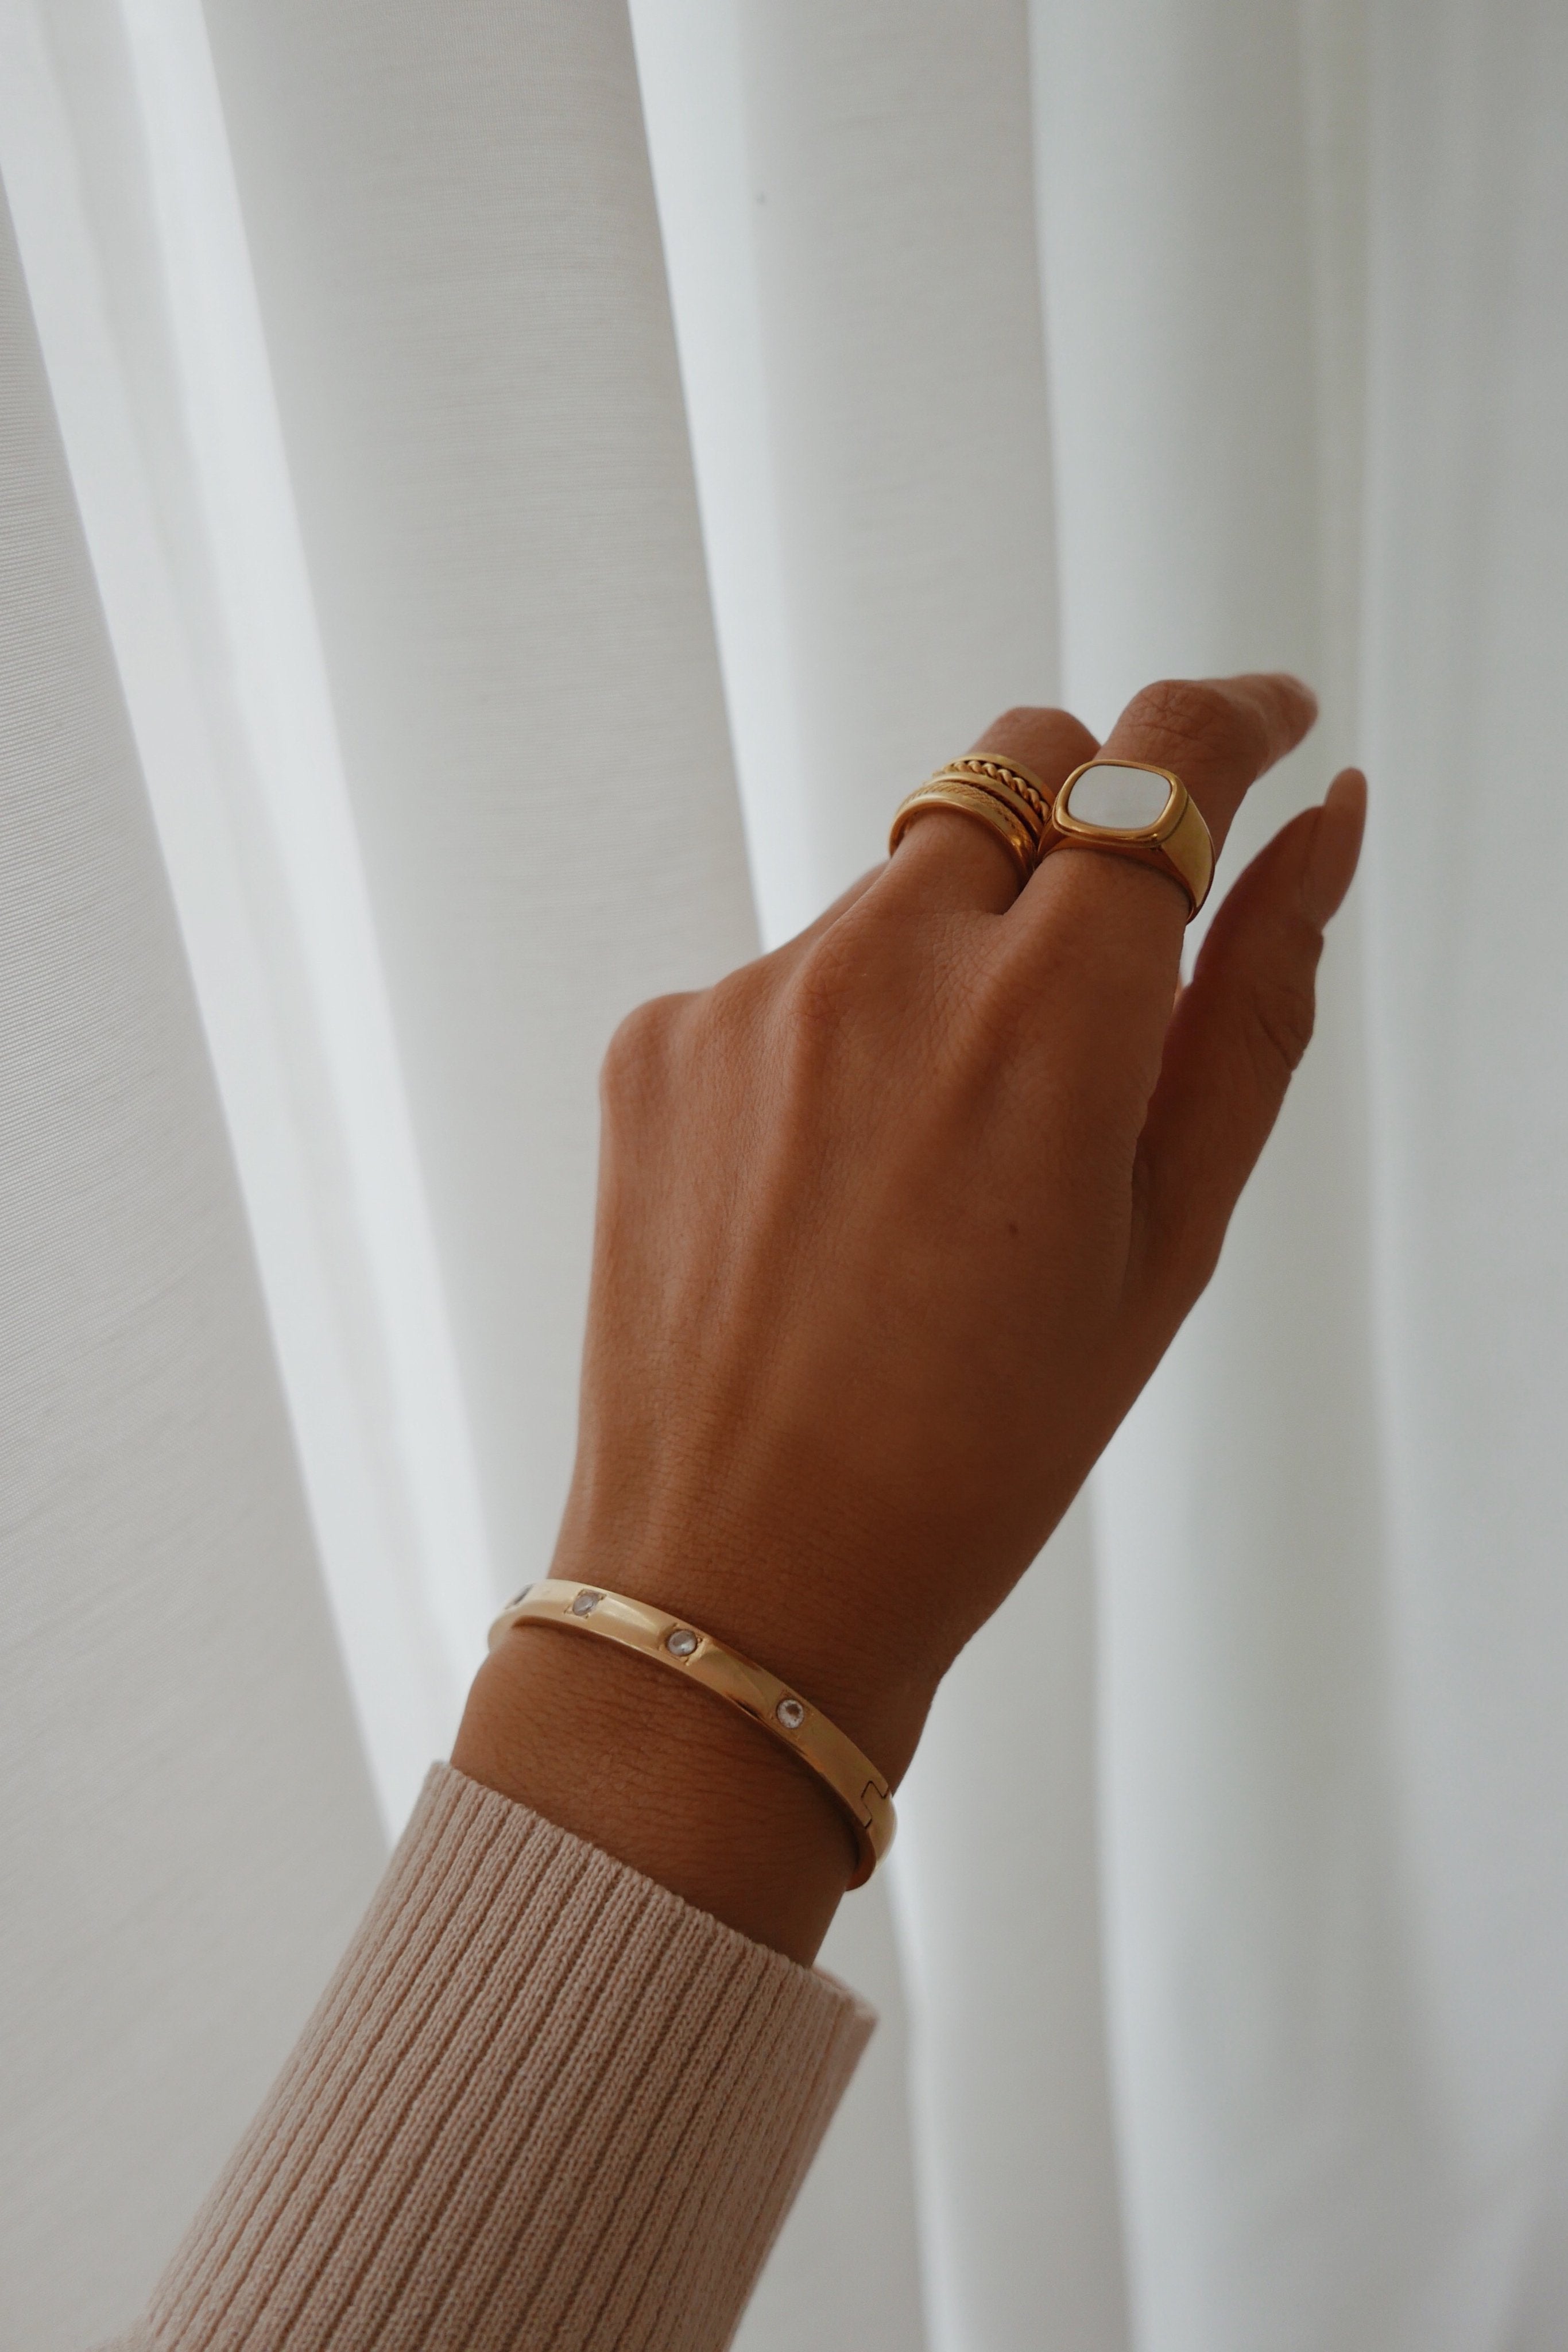 Amata Cuff - Boutique Minimaliste has waterproof, durable, elegant and vintage inspired jewelry